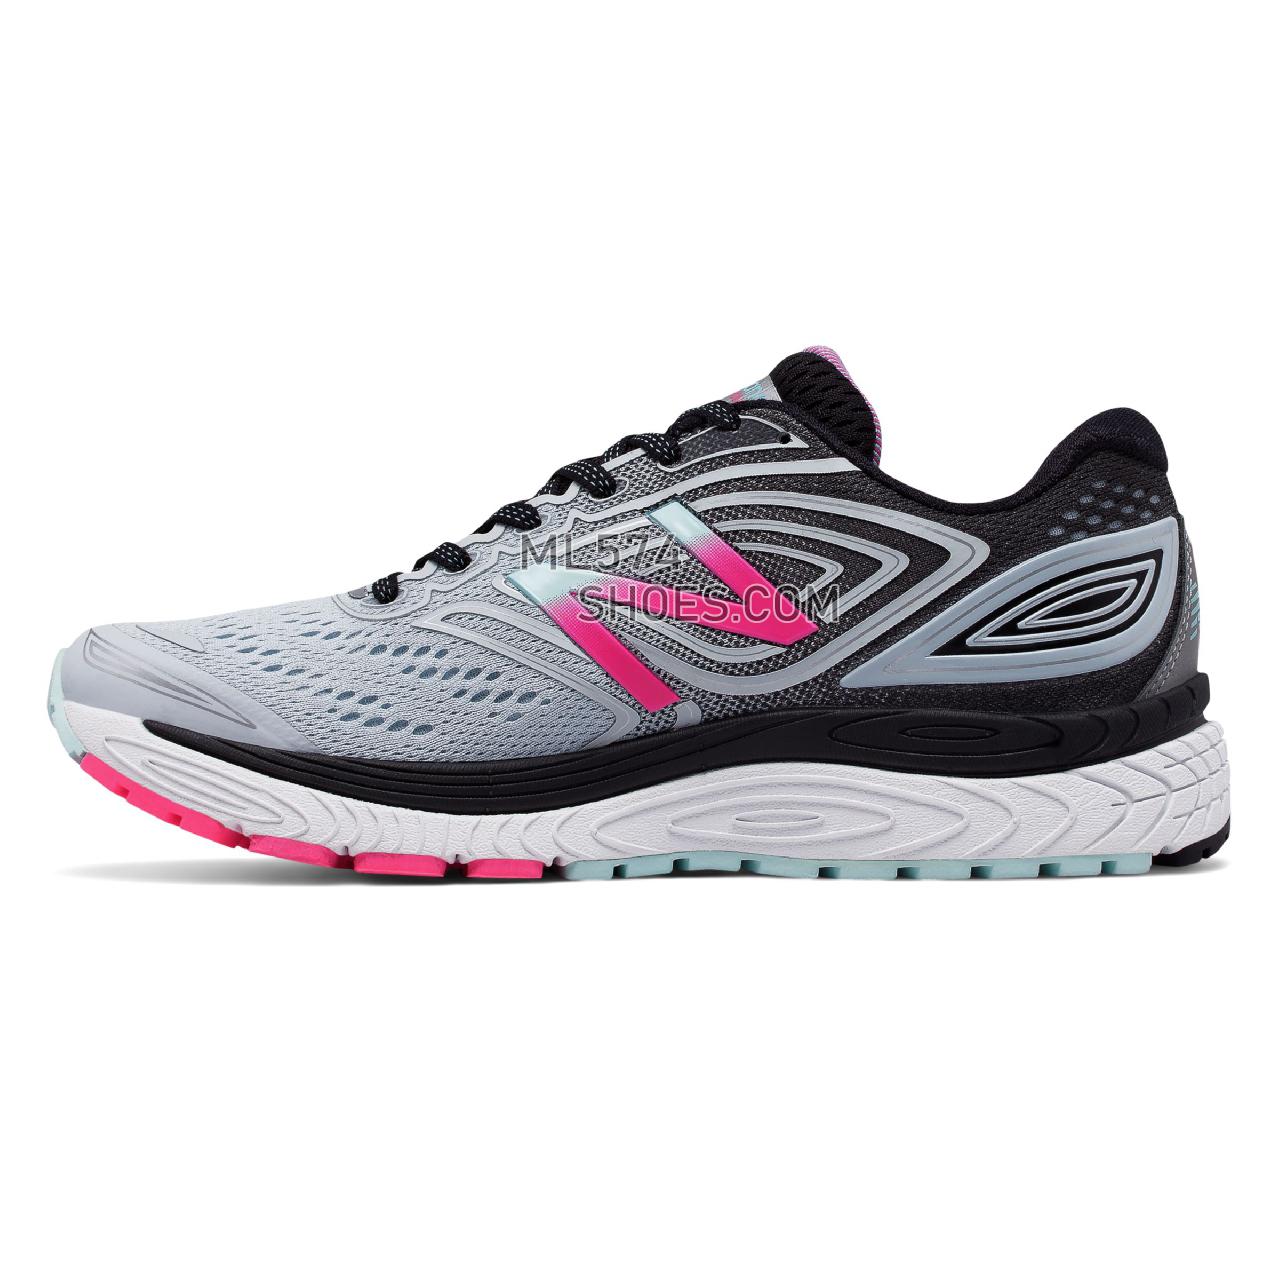 New Balance 880v7 - Women's 880 - Running Light Porcelain Blue with Black and Alpha Pink - W880GB7